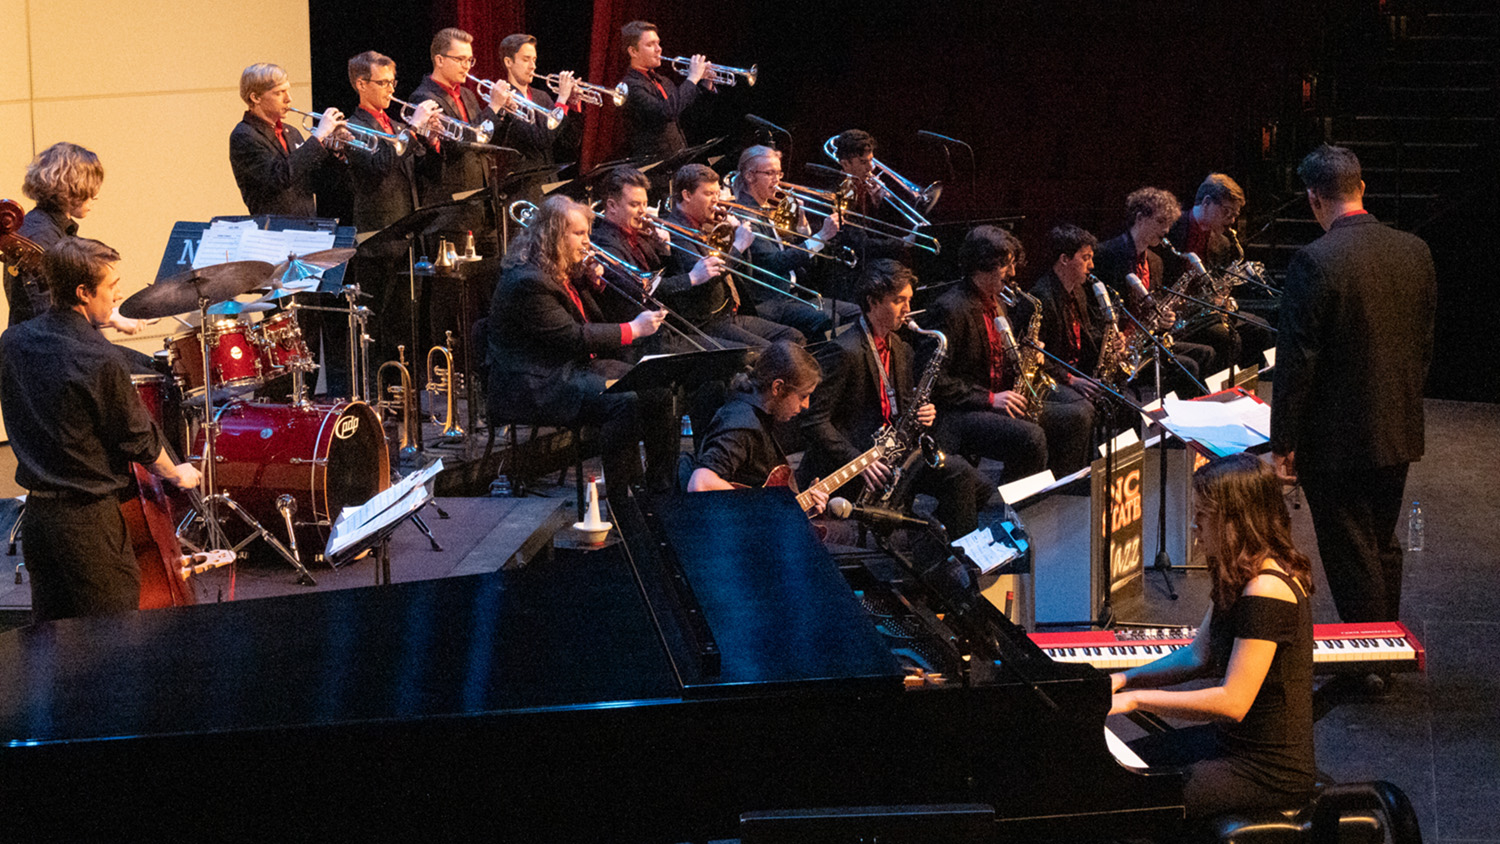 Musicians perform on risers during a jazz orchestra concert.